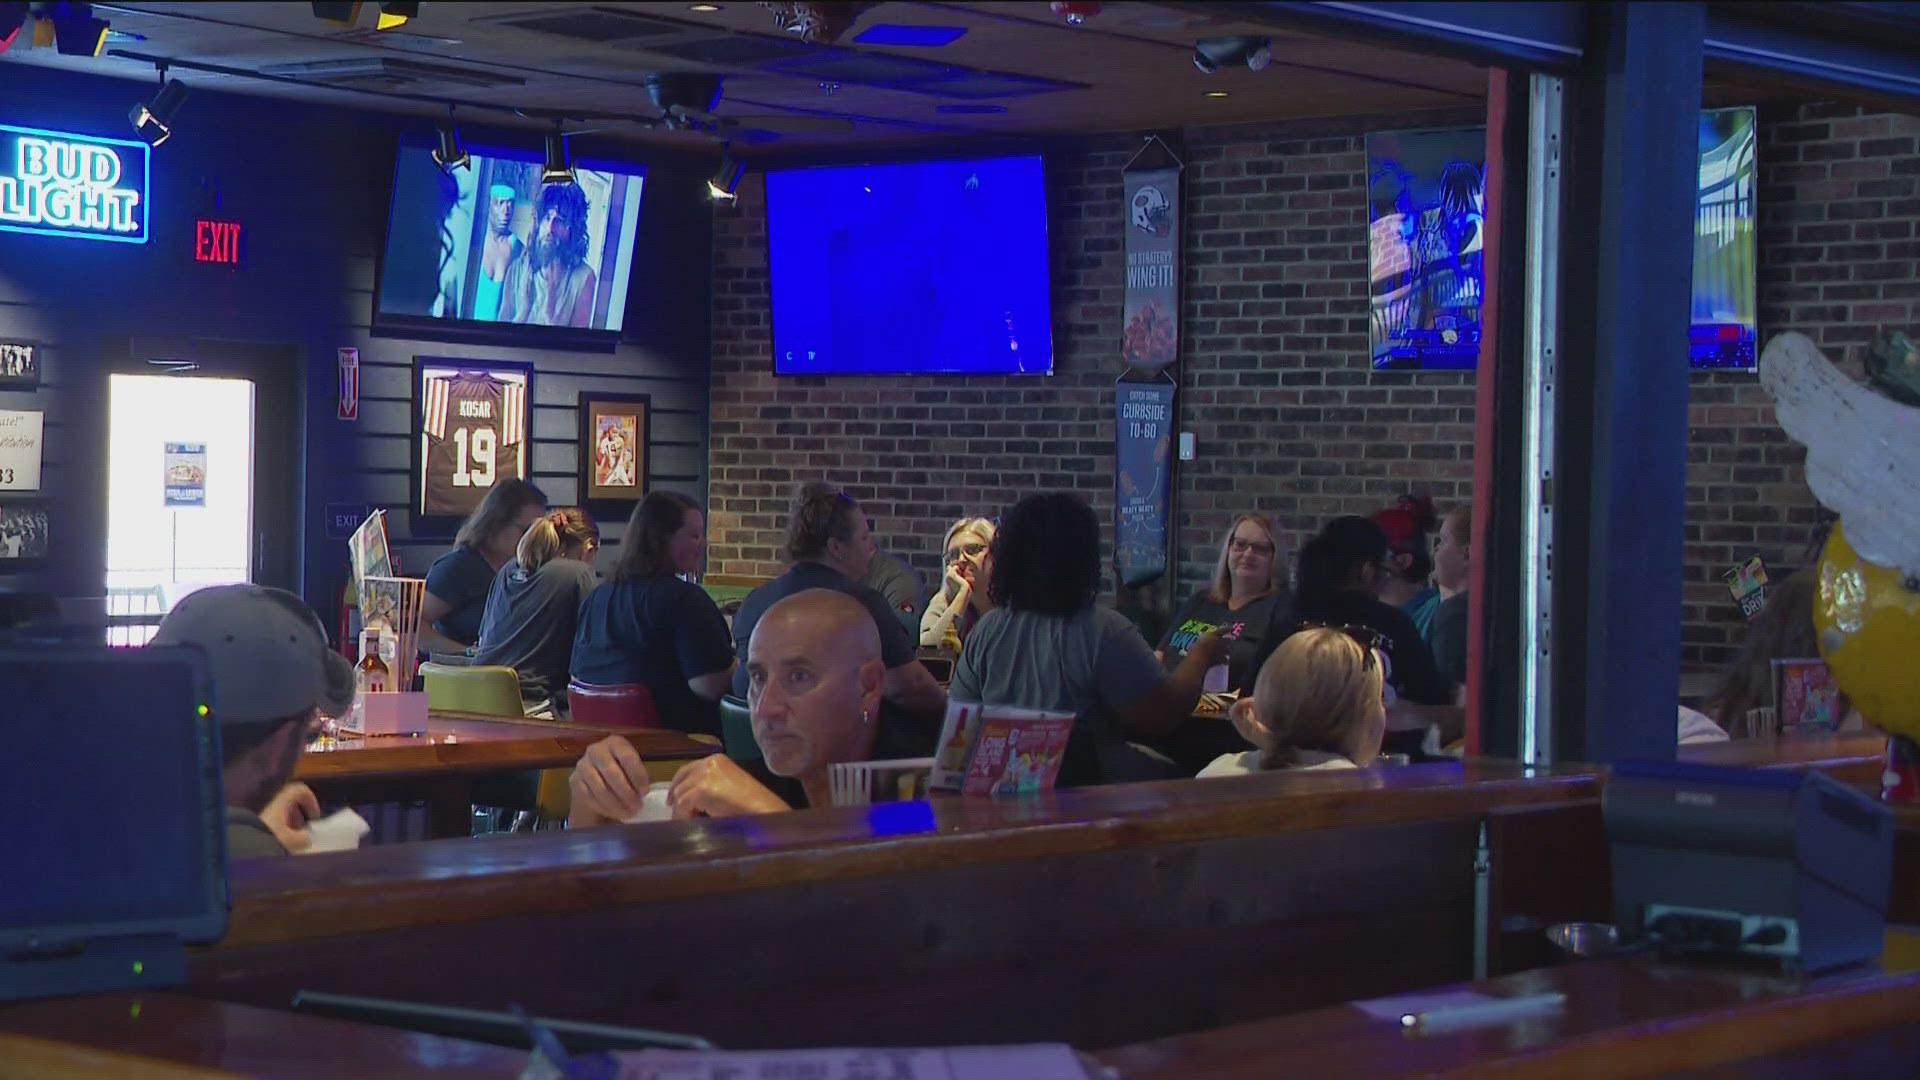 A west Toledo restaurant is using funds from sales to build a home for an injured veteran.